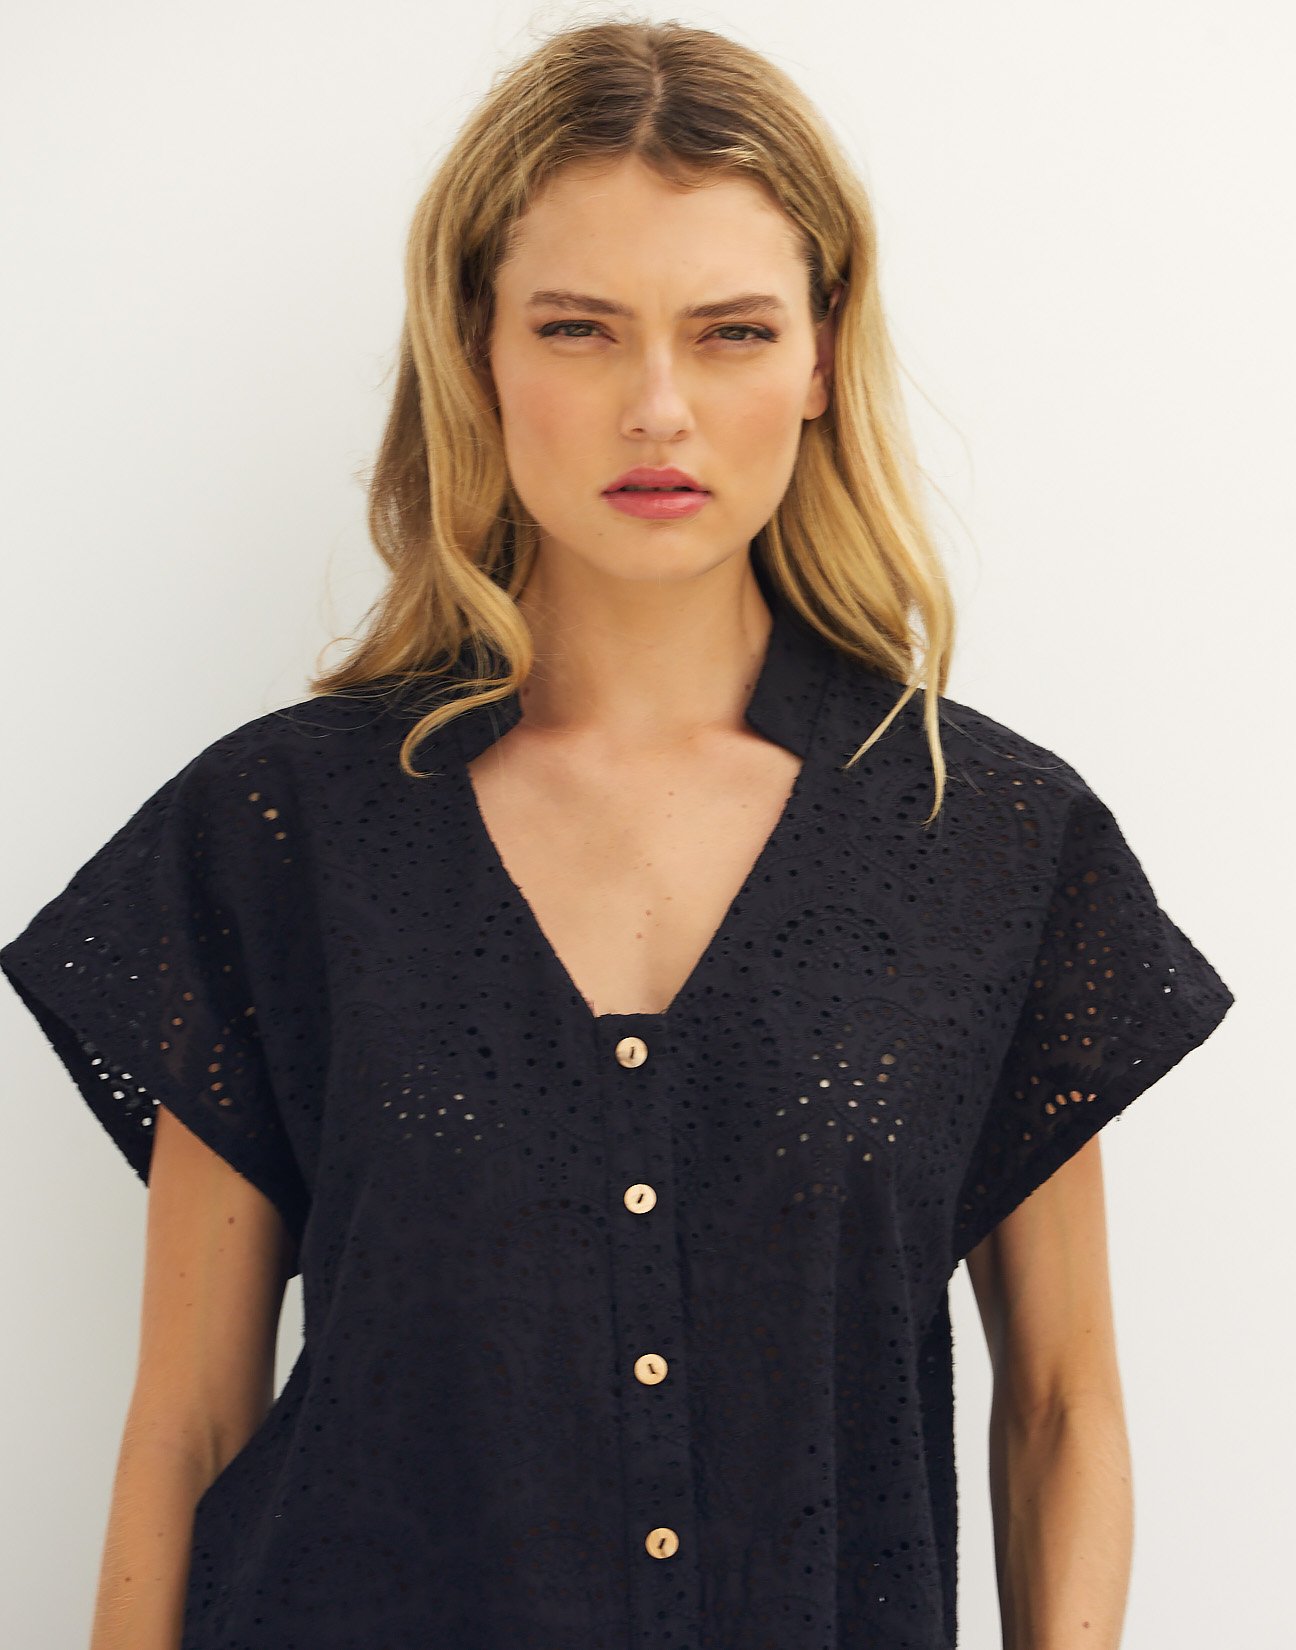 Embroidery shirt